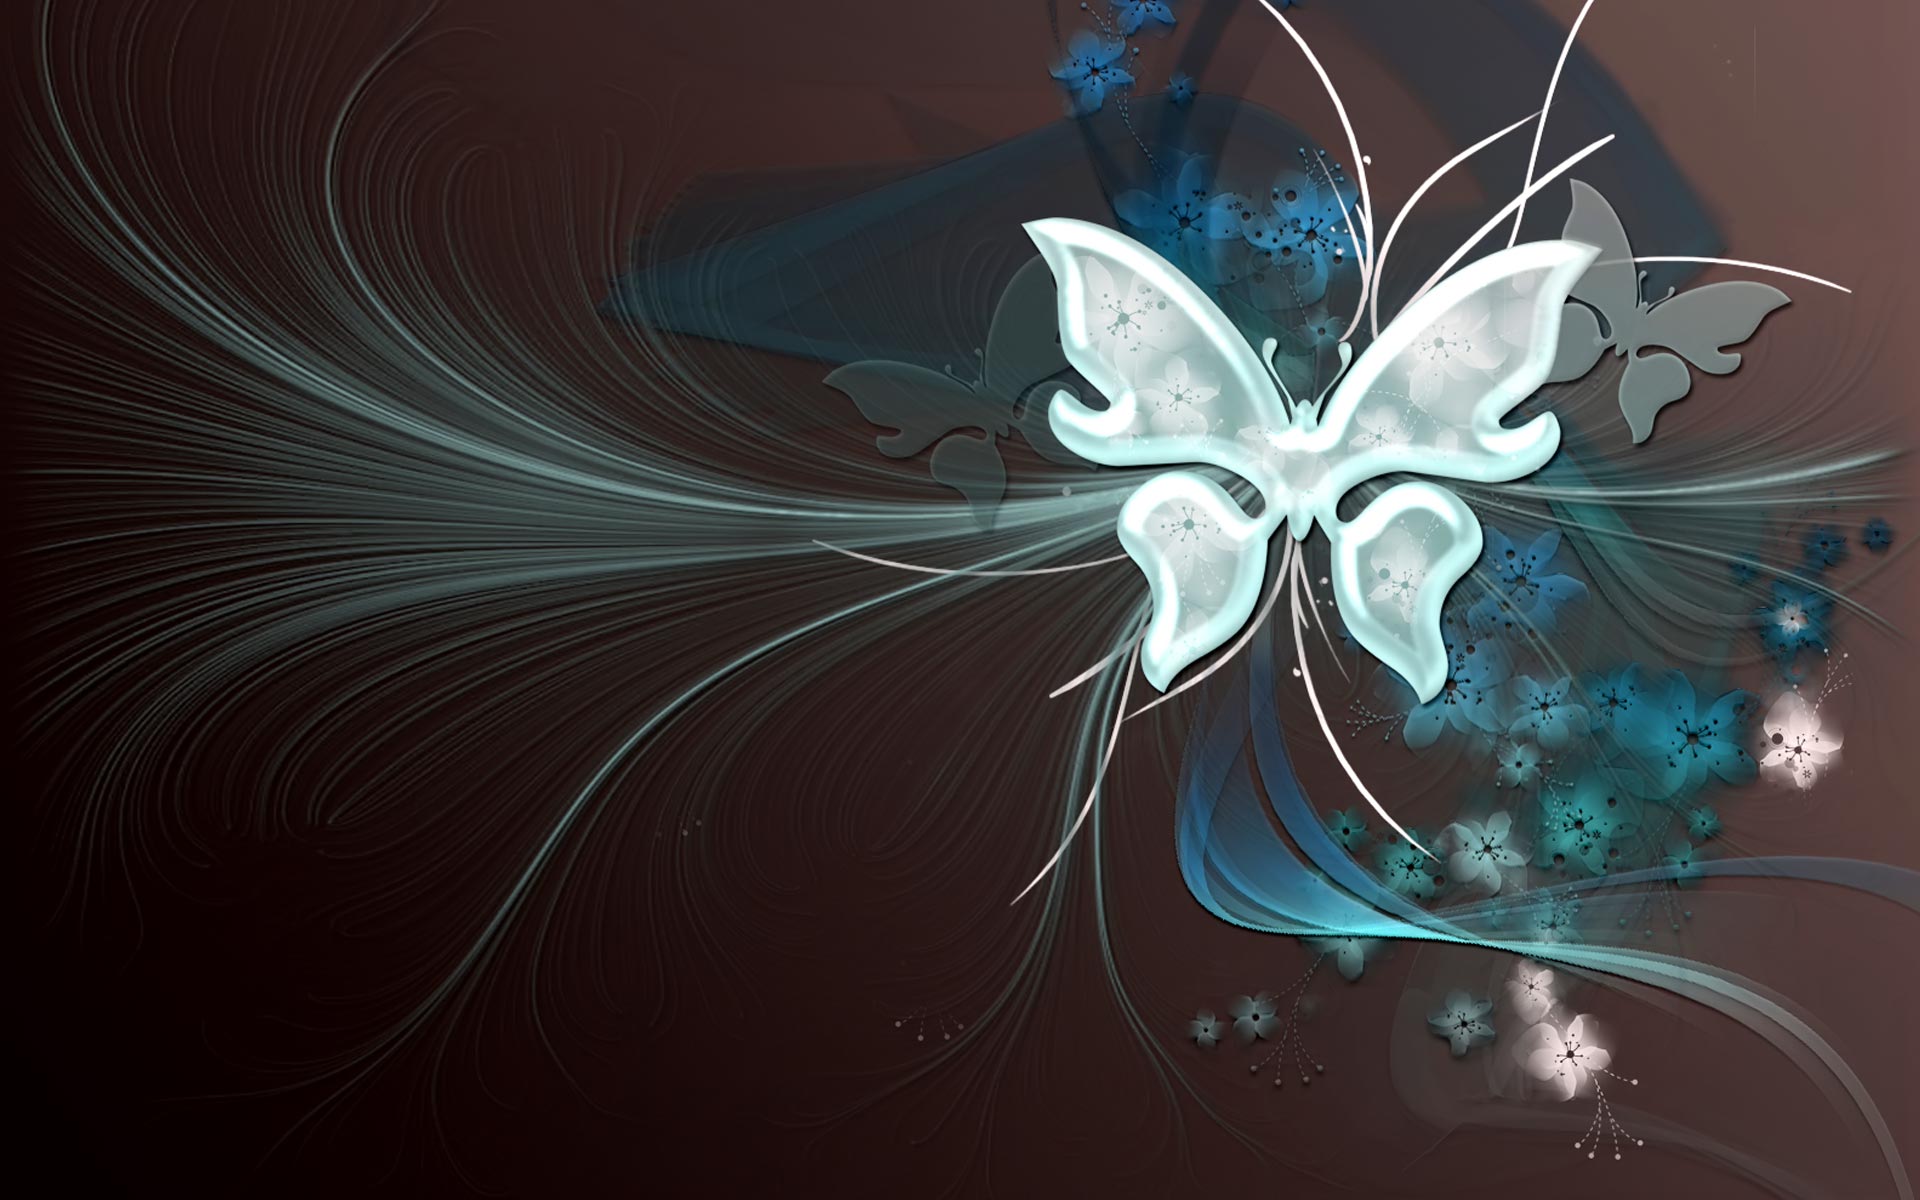  Butterfly vector backgrounds hd Wallpaper and make this wallpaper for 1920x1200